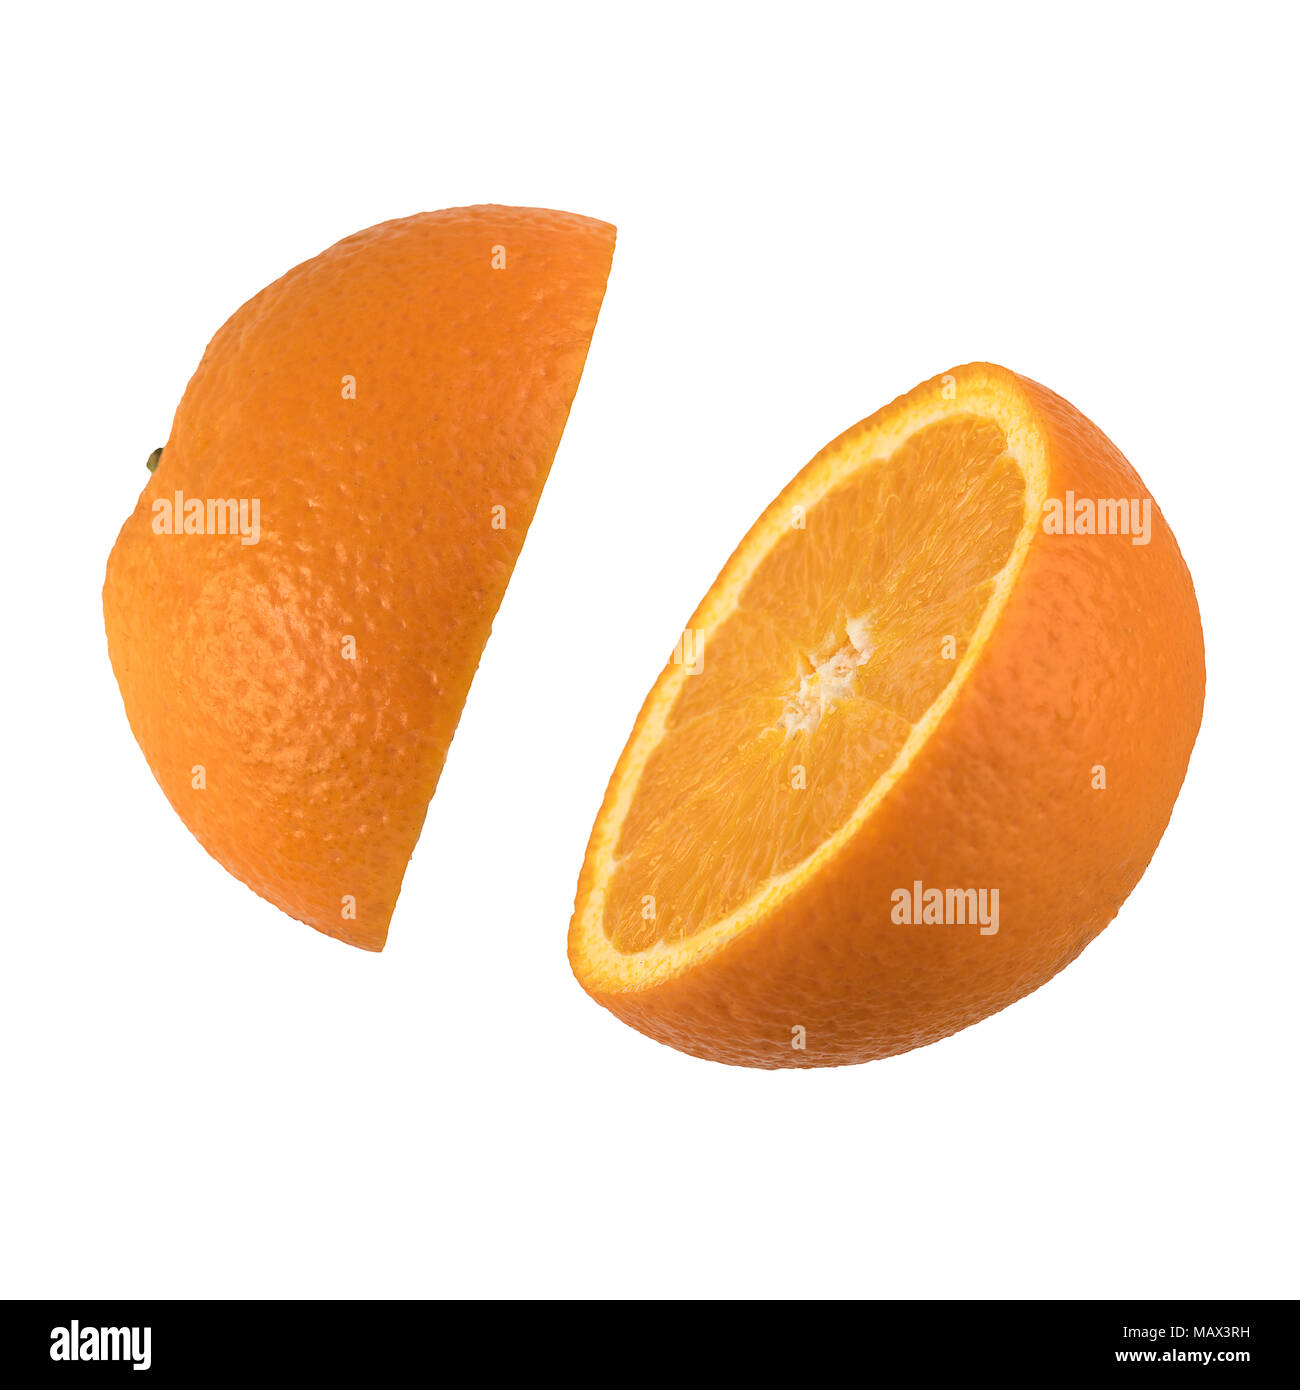 cut out image of 2 half's of an orange Stock Photo